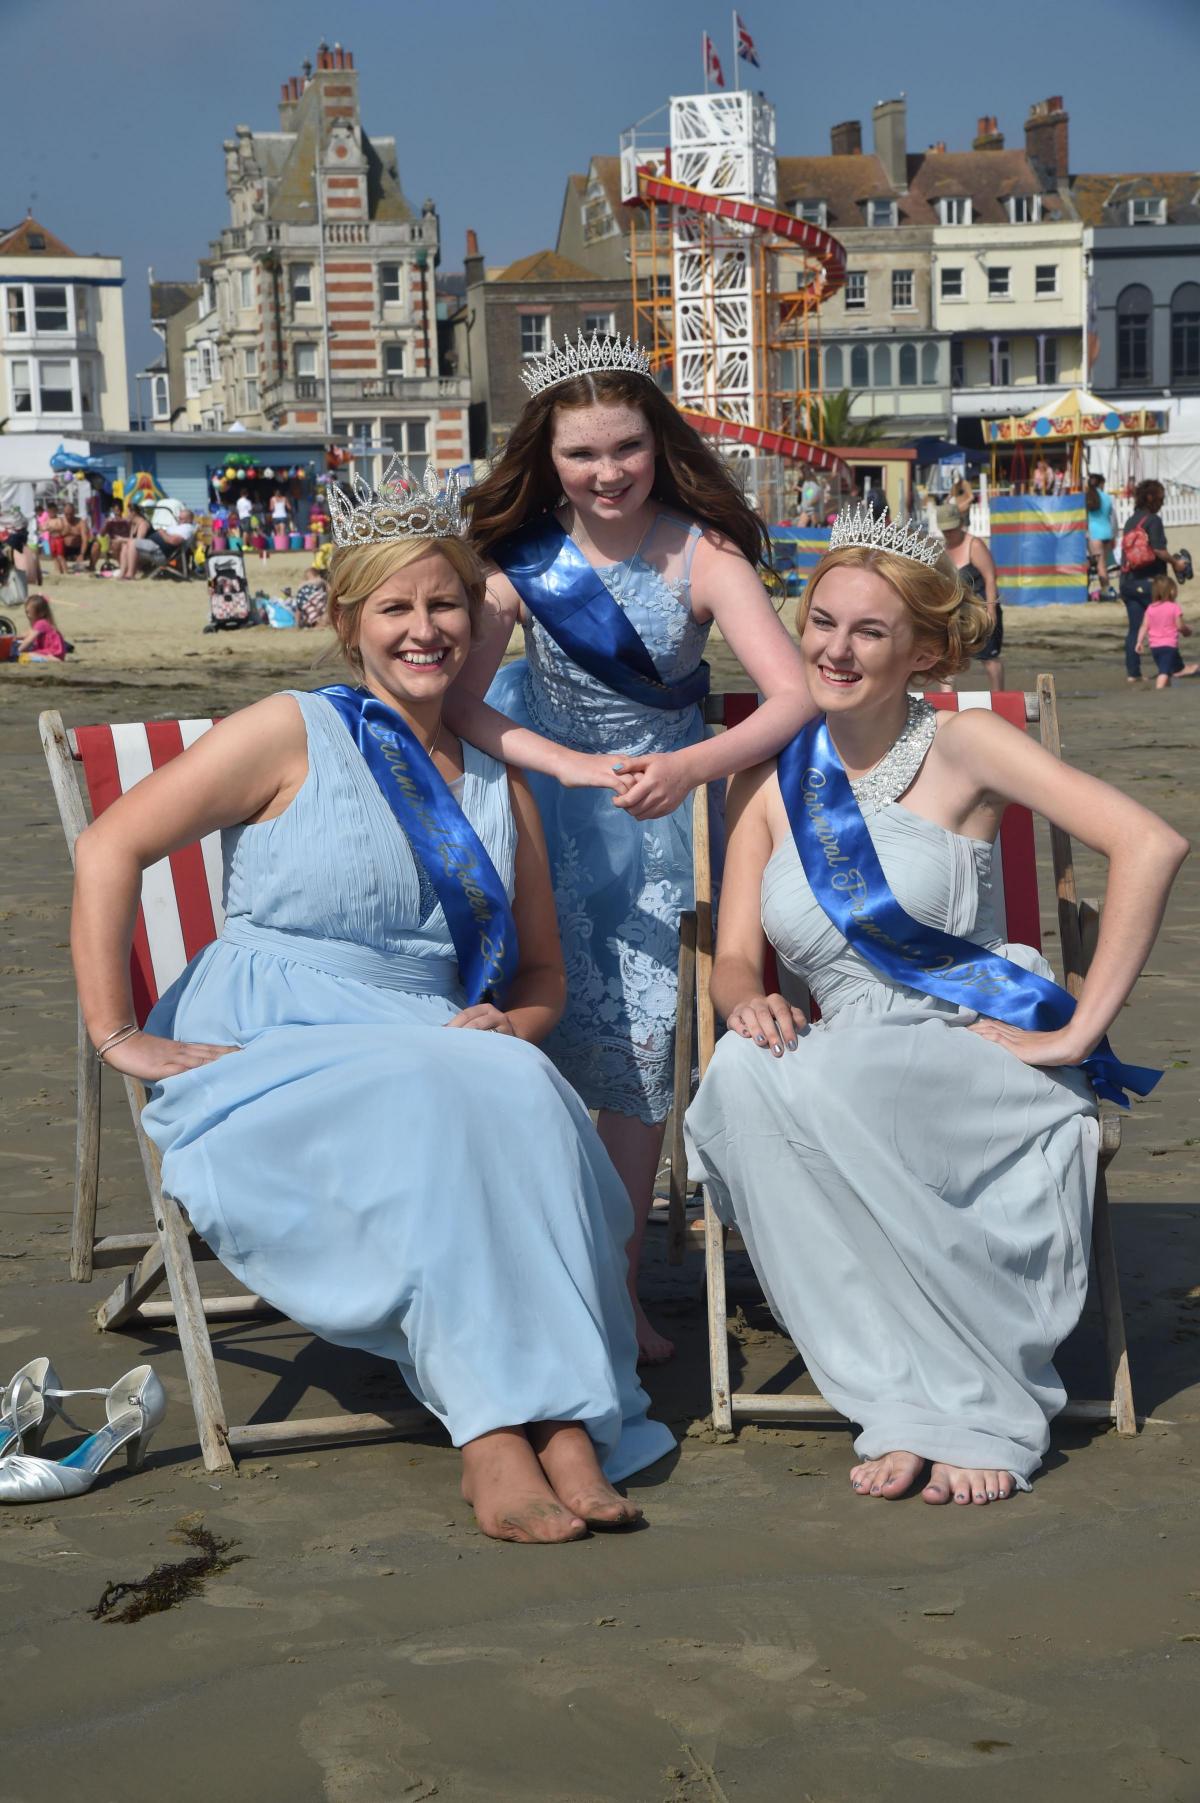 SEASIDE ROYALTY: The carnival queen and princesses